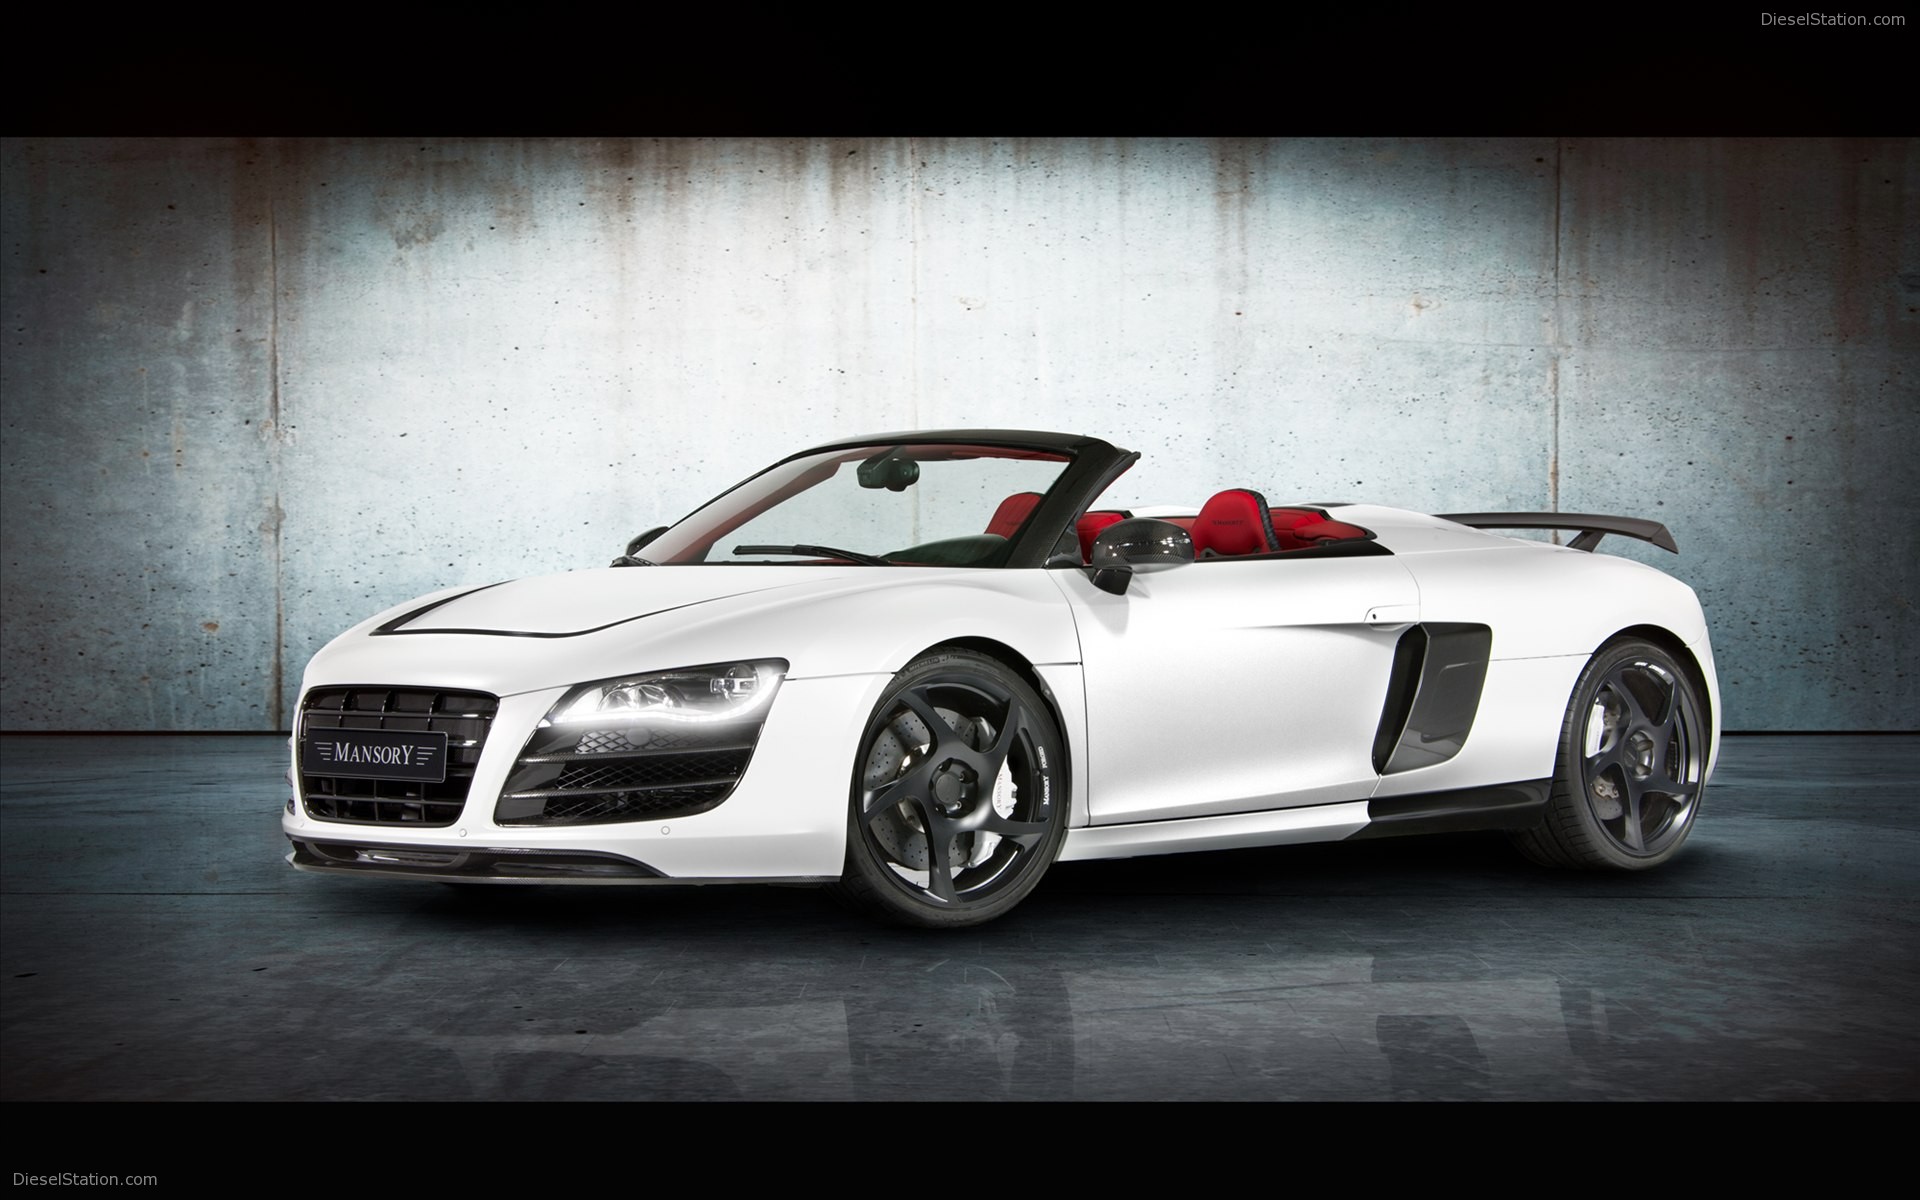 Mansory Audi R8 Spyder 2011 Widescreen Exotic Car Wallpapers 08 of 26